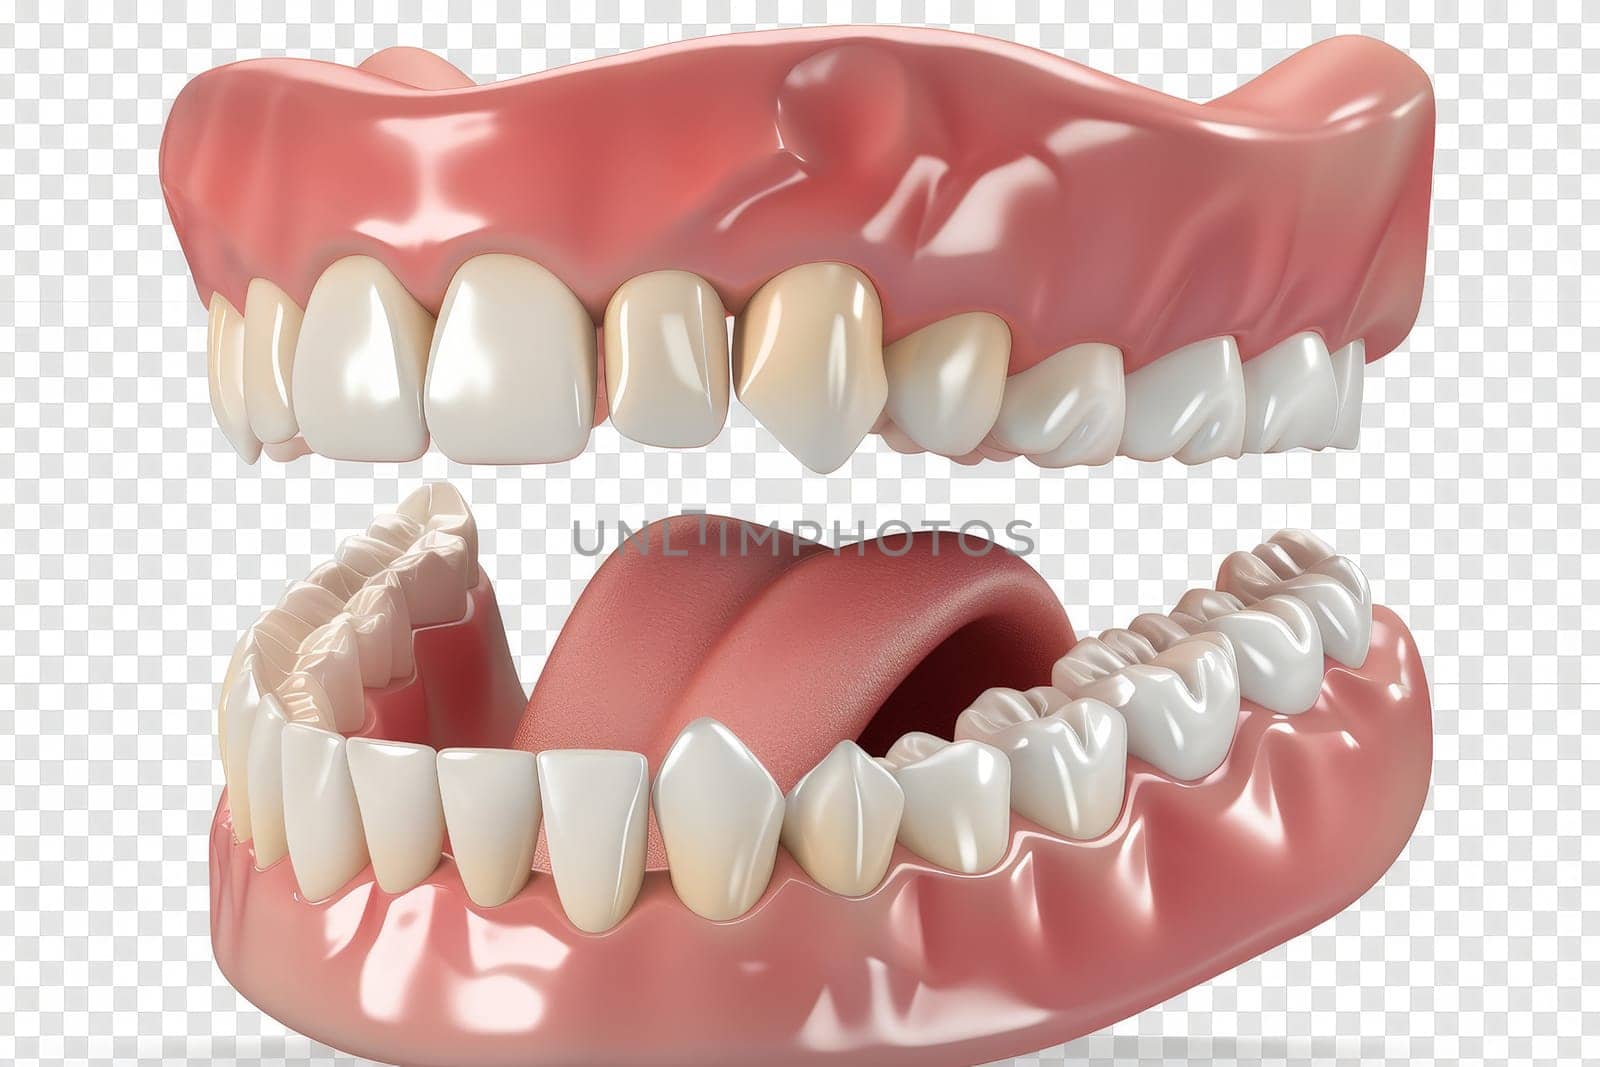 a mockup of a dental model human jaw or oral cavity..